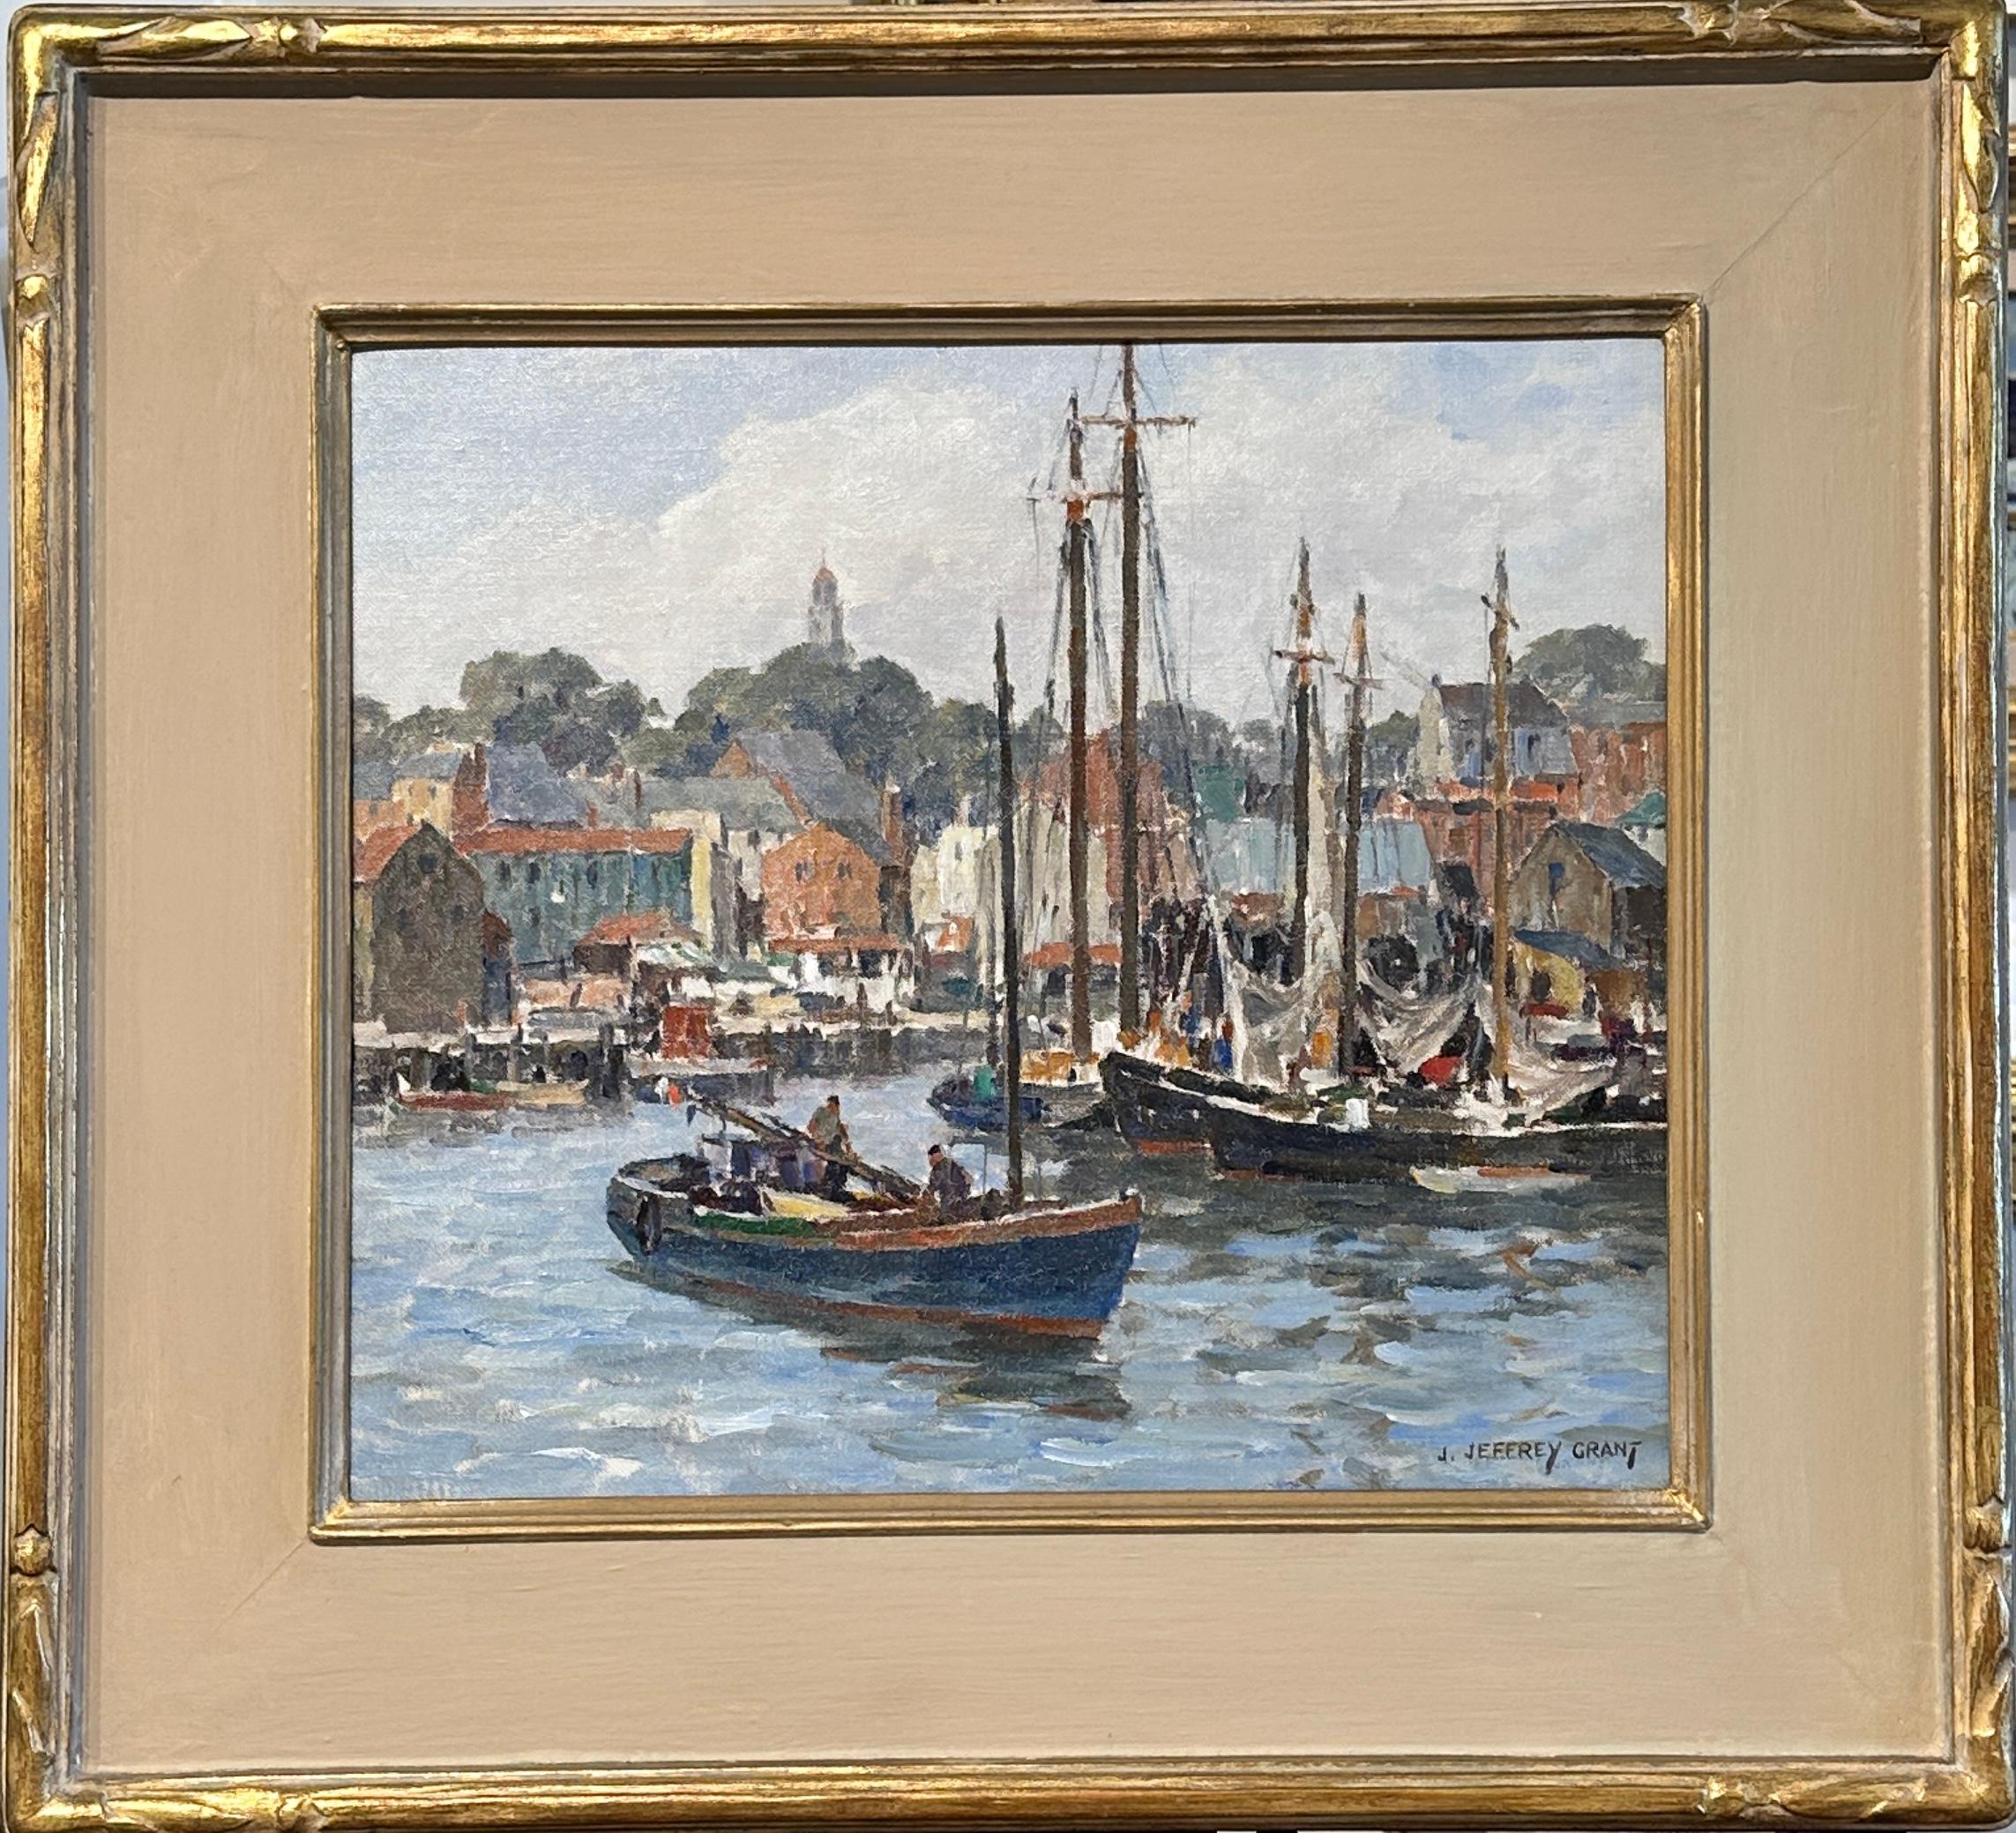 This is a fantastic example of the artist's mature work.  Great subject matter with bold brushwork and colorful paint application.  The painting is bright and fresh and the original (and restored) frame compliments it perfectly.  

Painting size